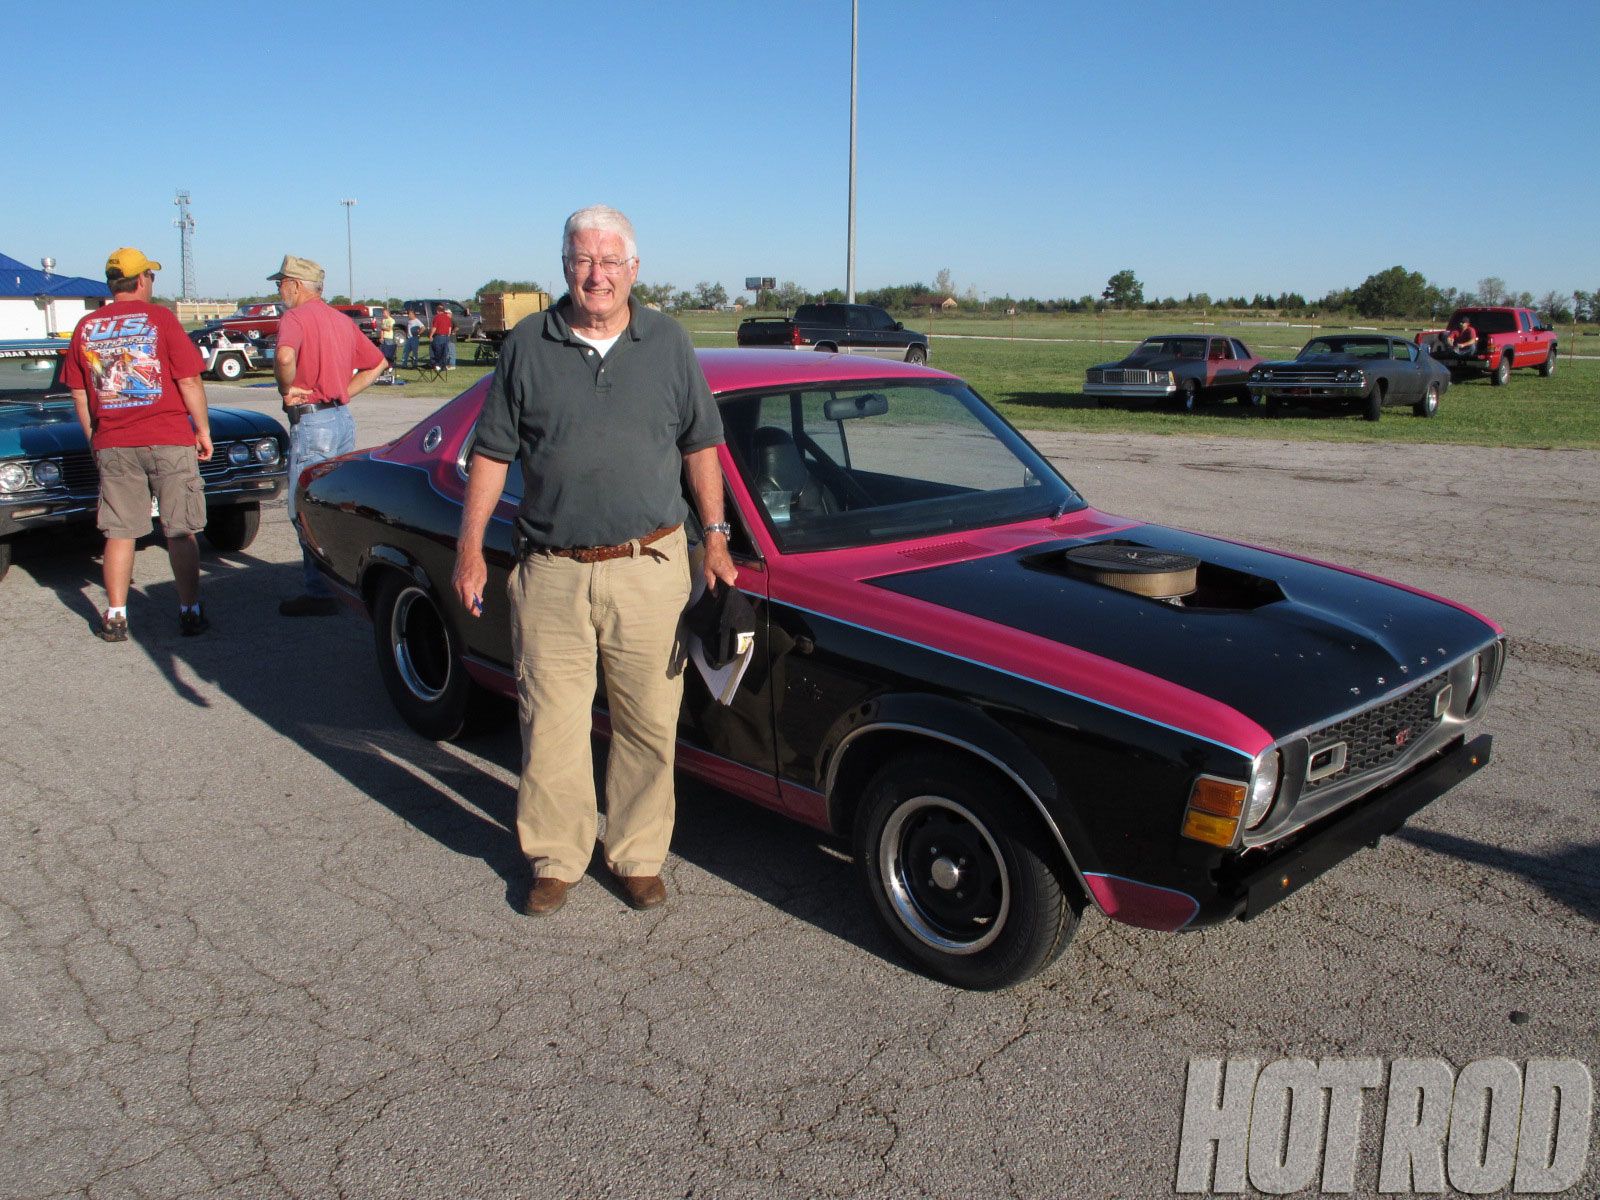 Attached picture 7429923-hrdp-1209w-2012-drag-week-tech-day-1132.jpg